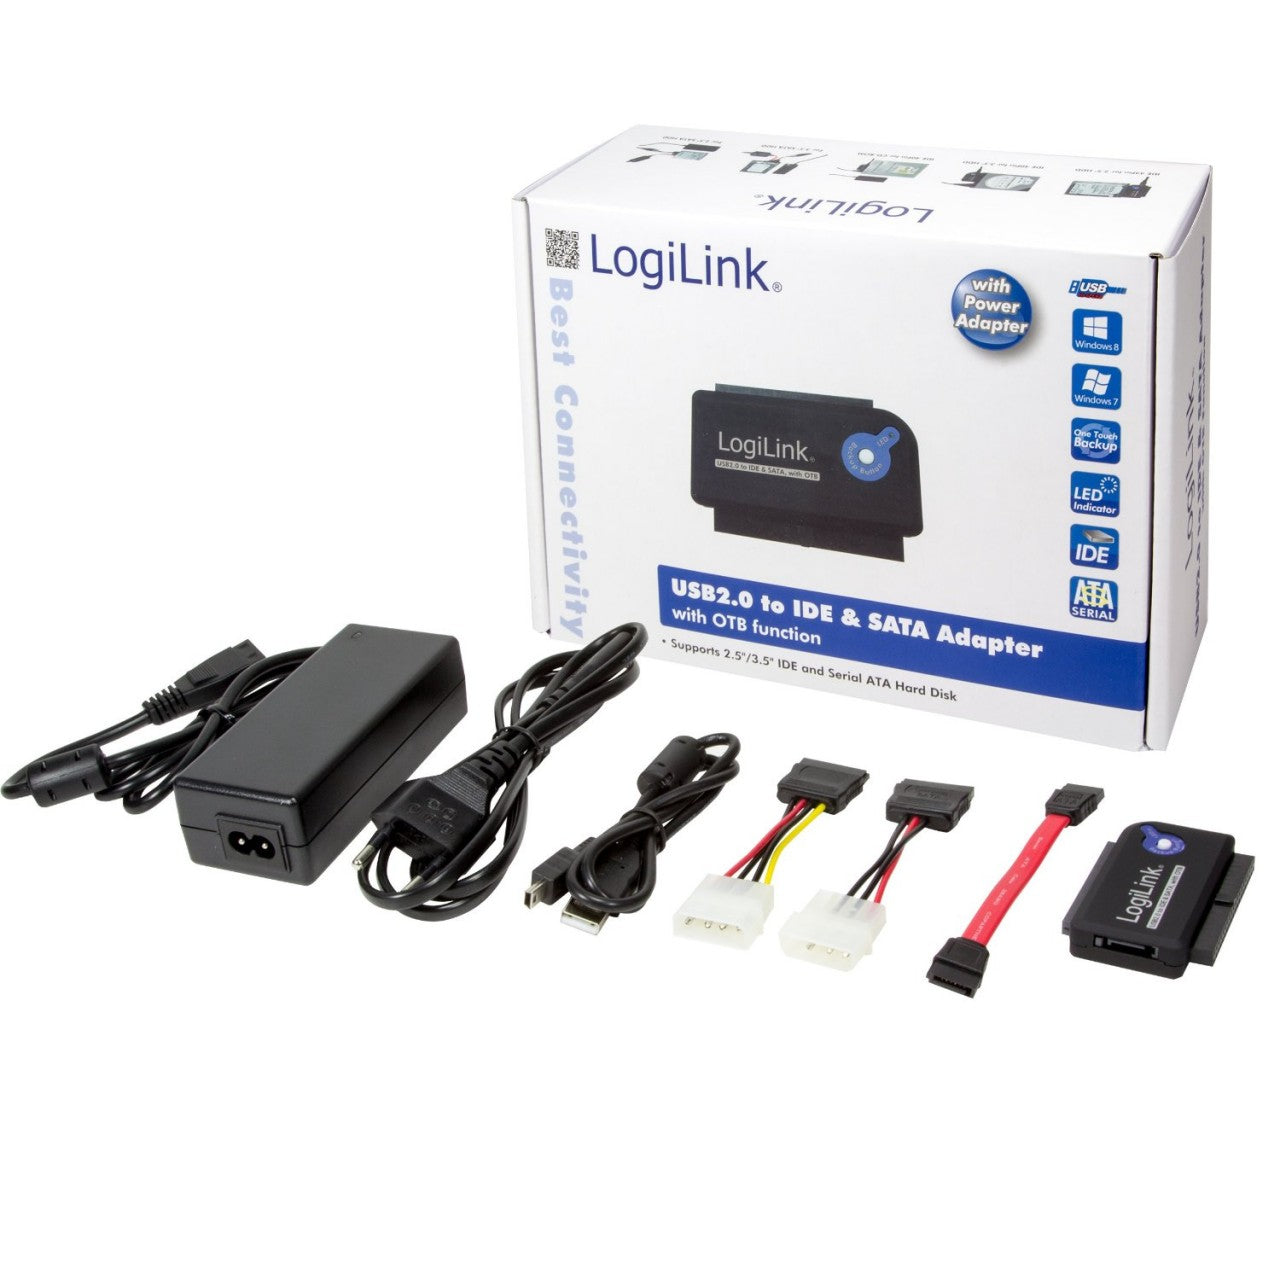 LogiLink USB 2.0 to IDE and SATA Cable with PSU AU0006D